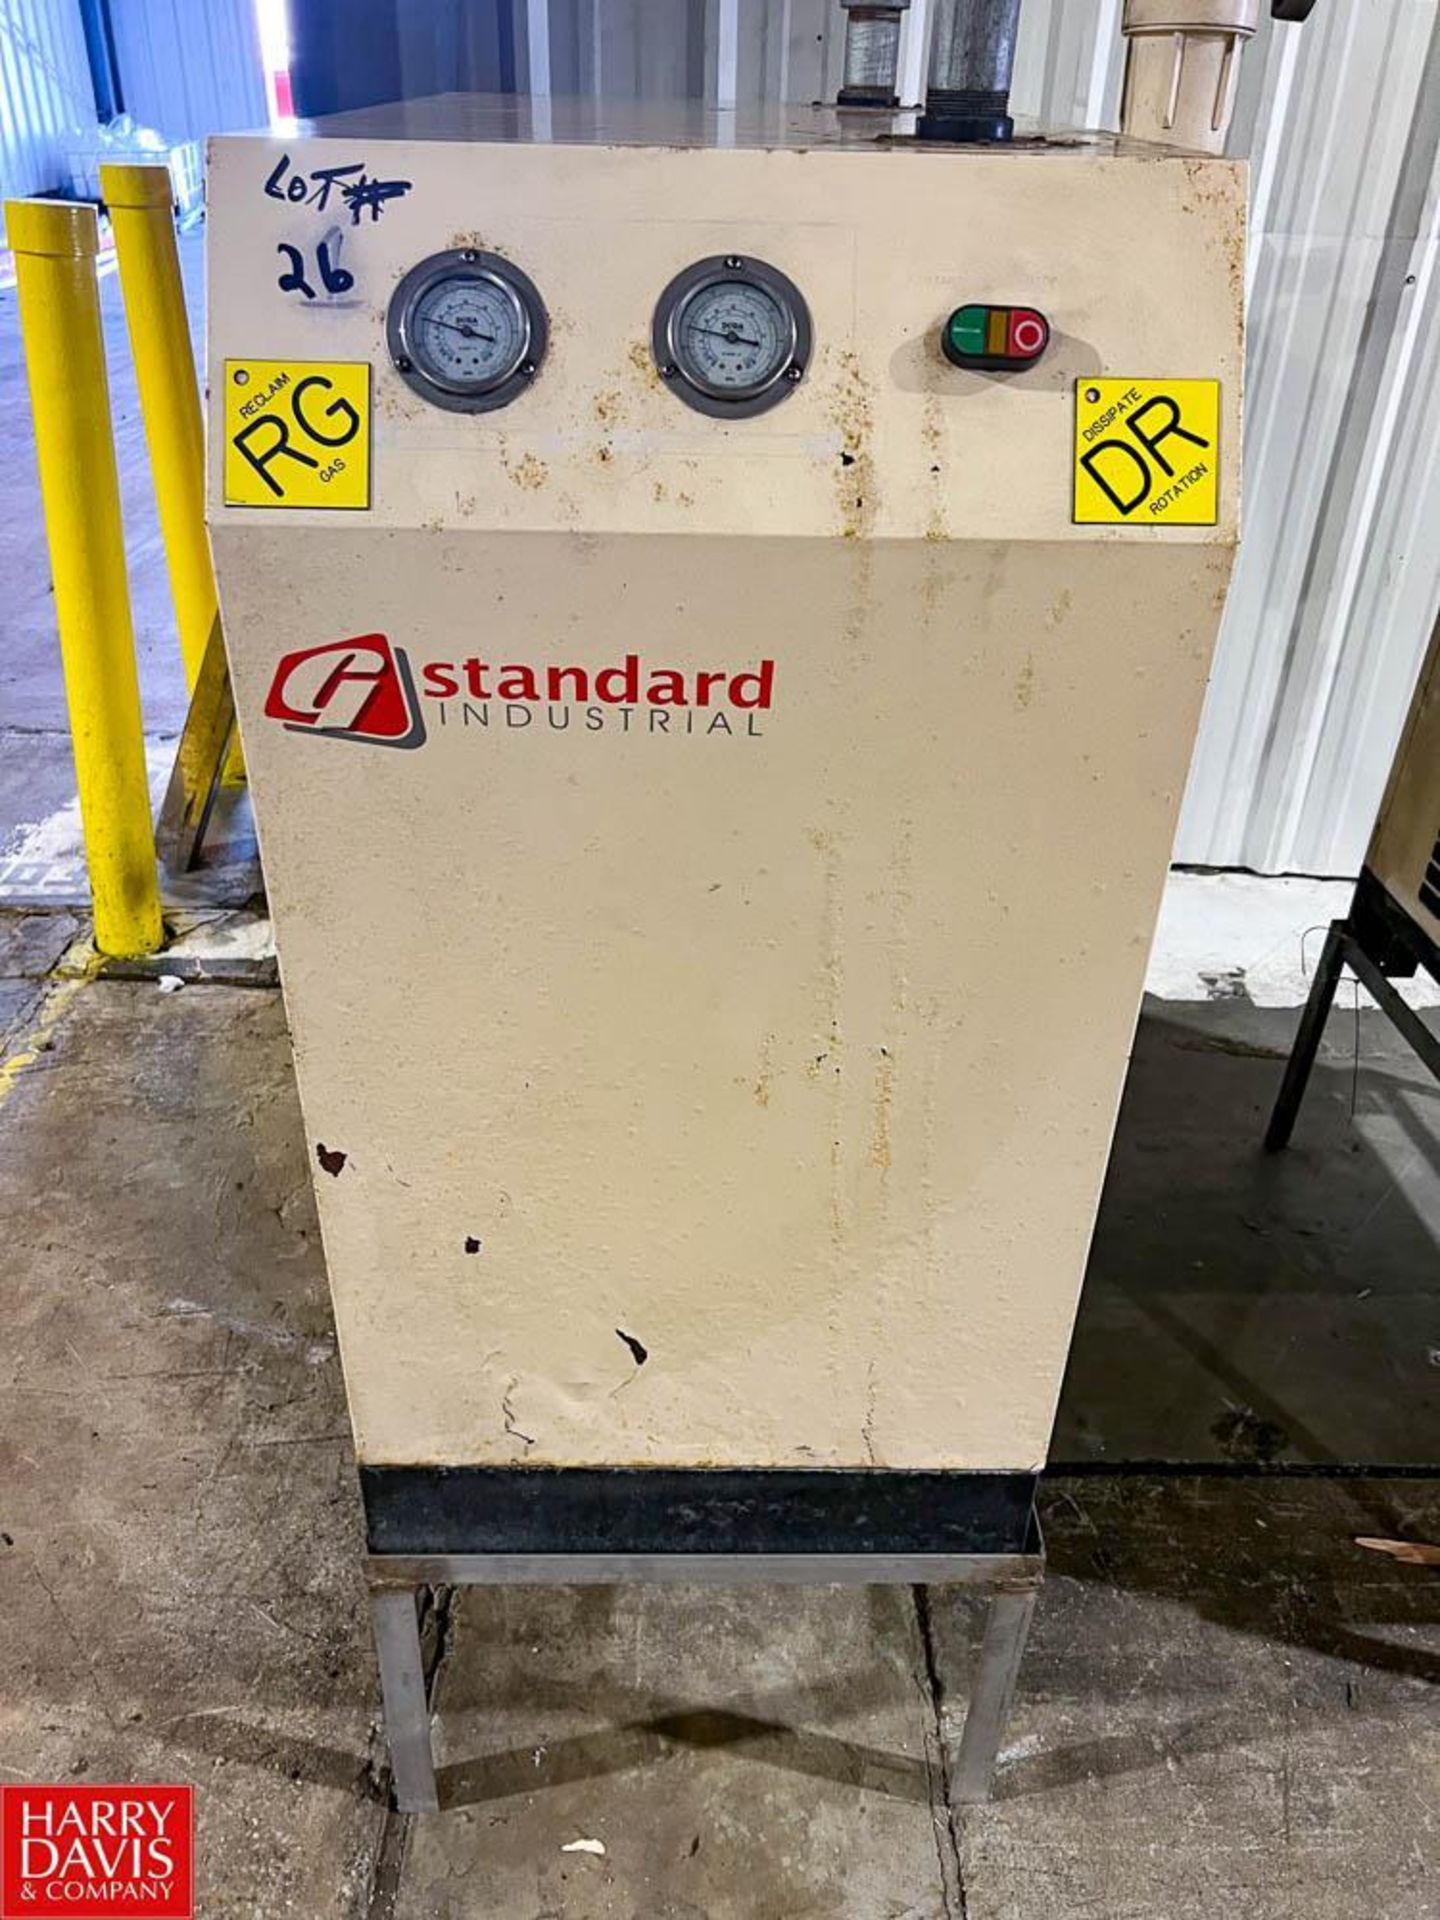 Standard Industrial Refrigerated Compressed Air Dryer, Model: MAD-200CFM (Location: New Orleans, LA)